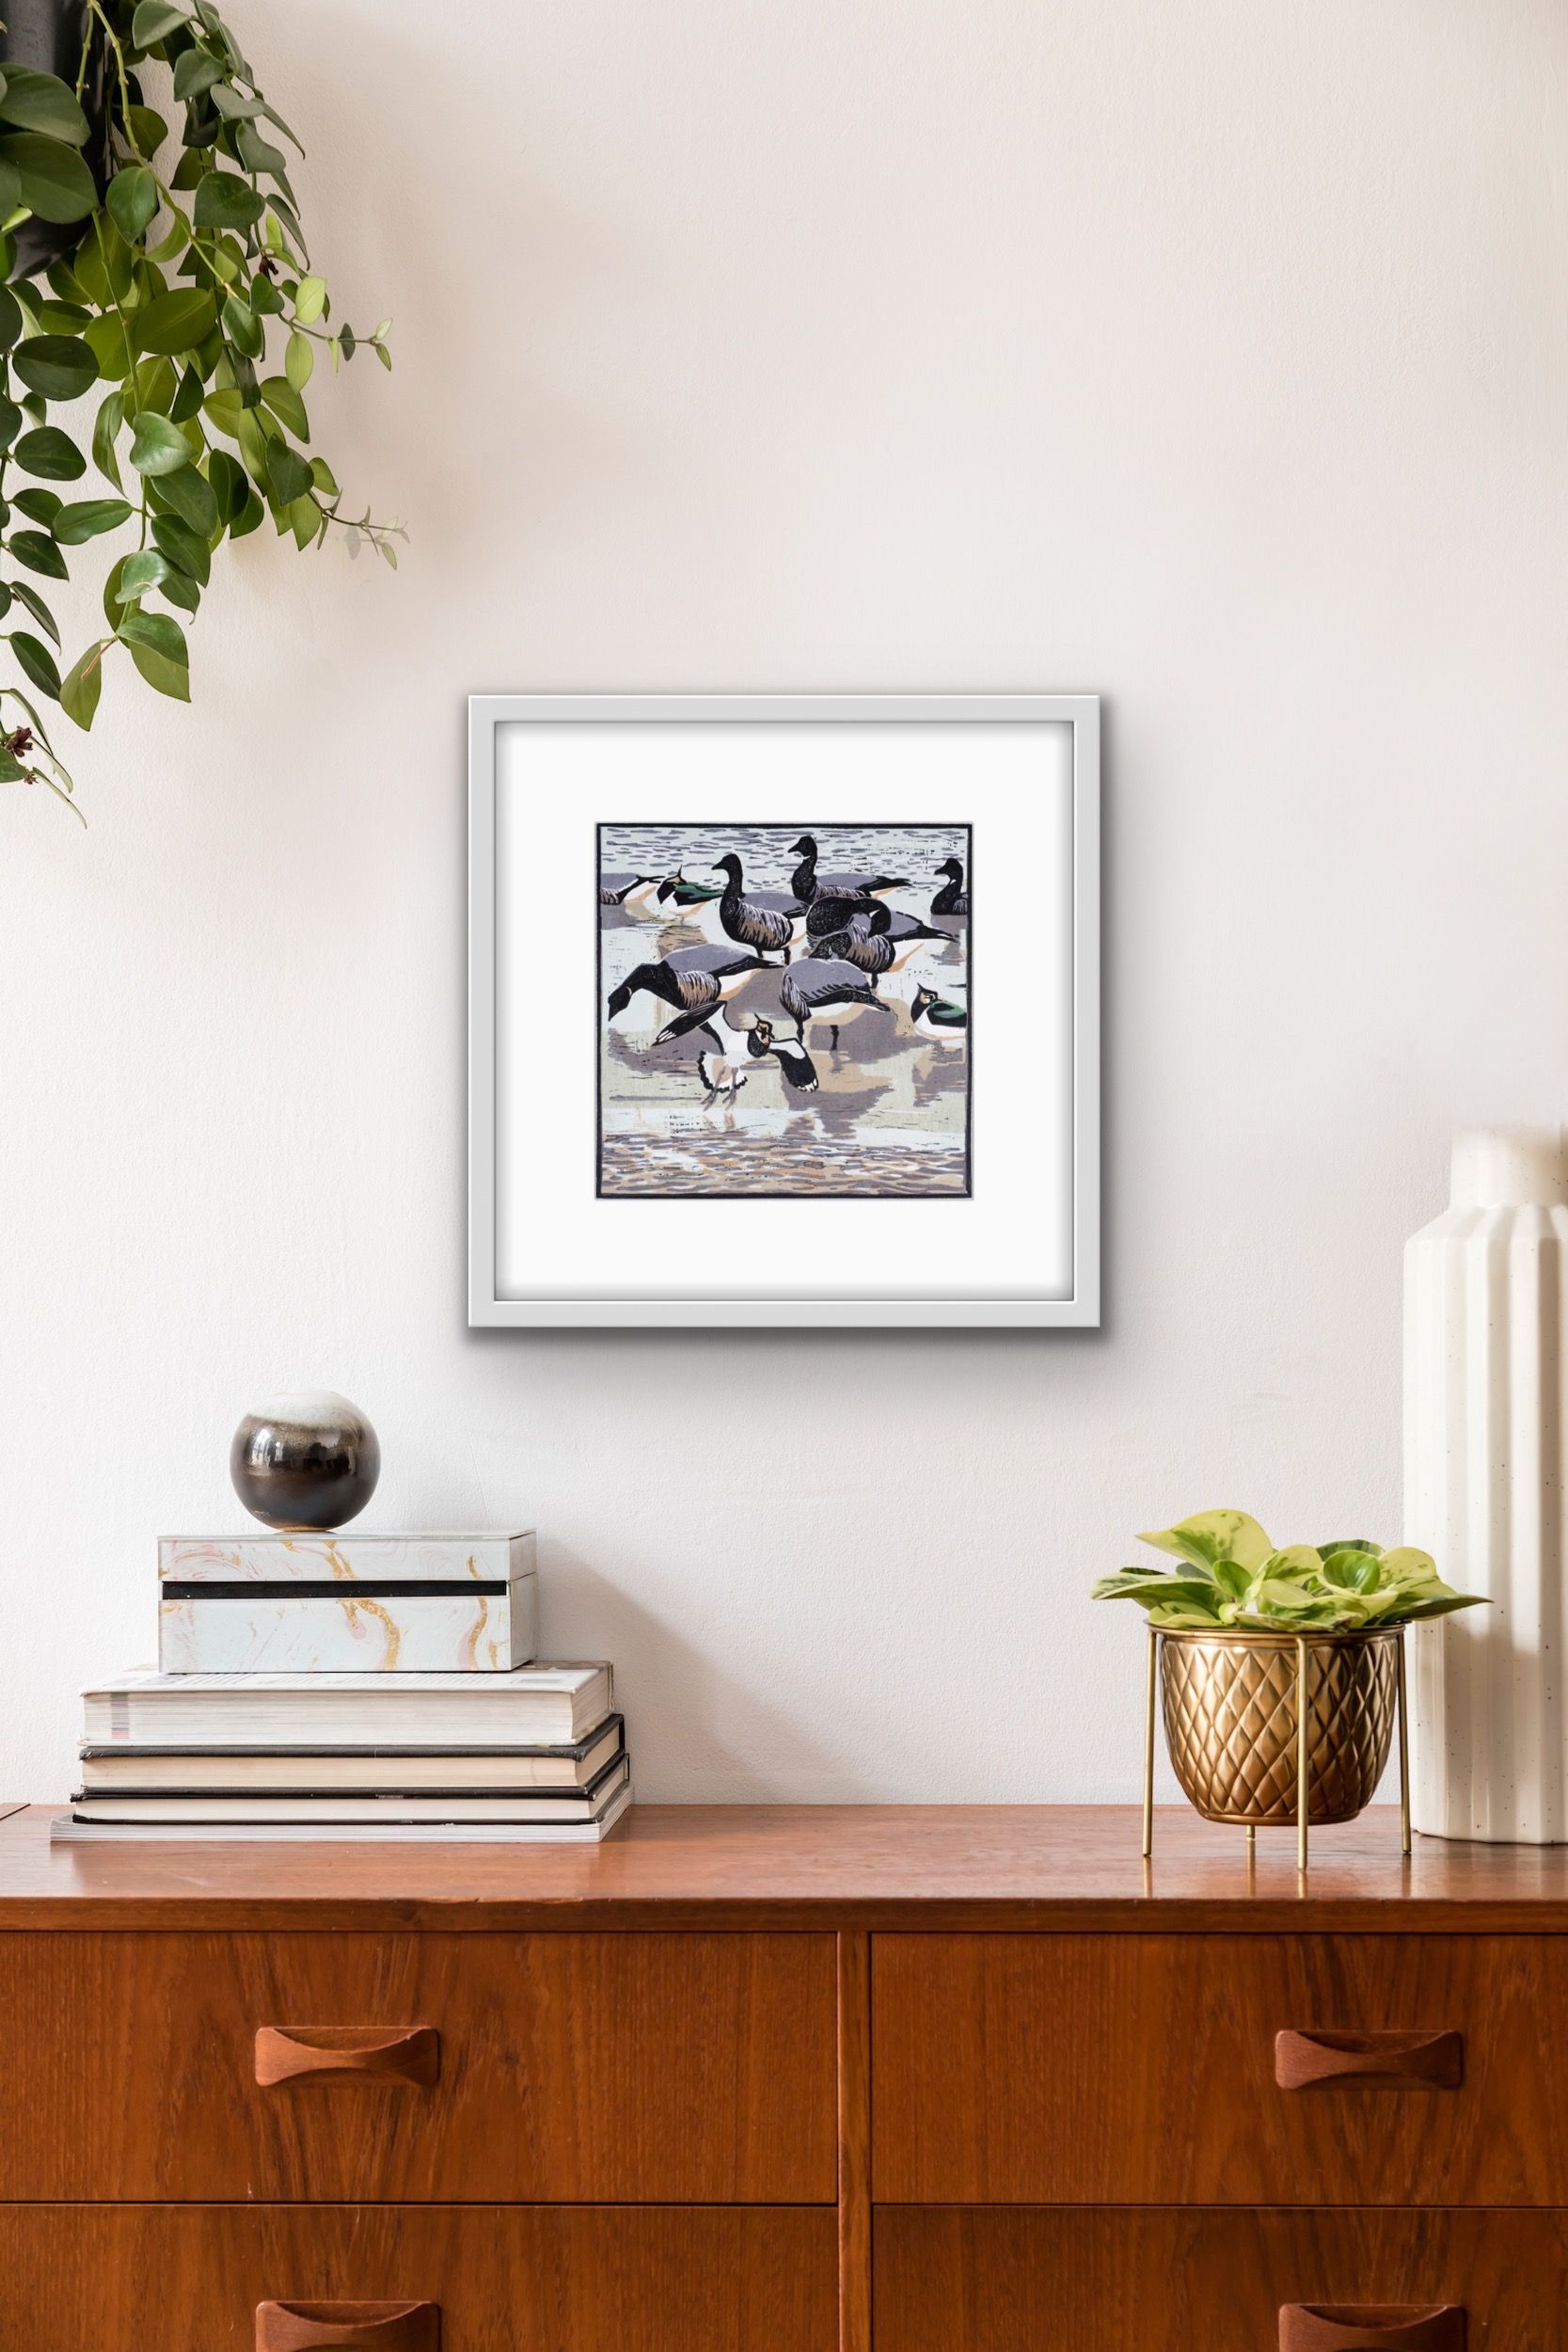 Brents & Lapwings by Robert Greenhalf - Secondary Image